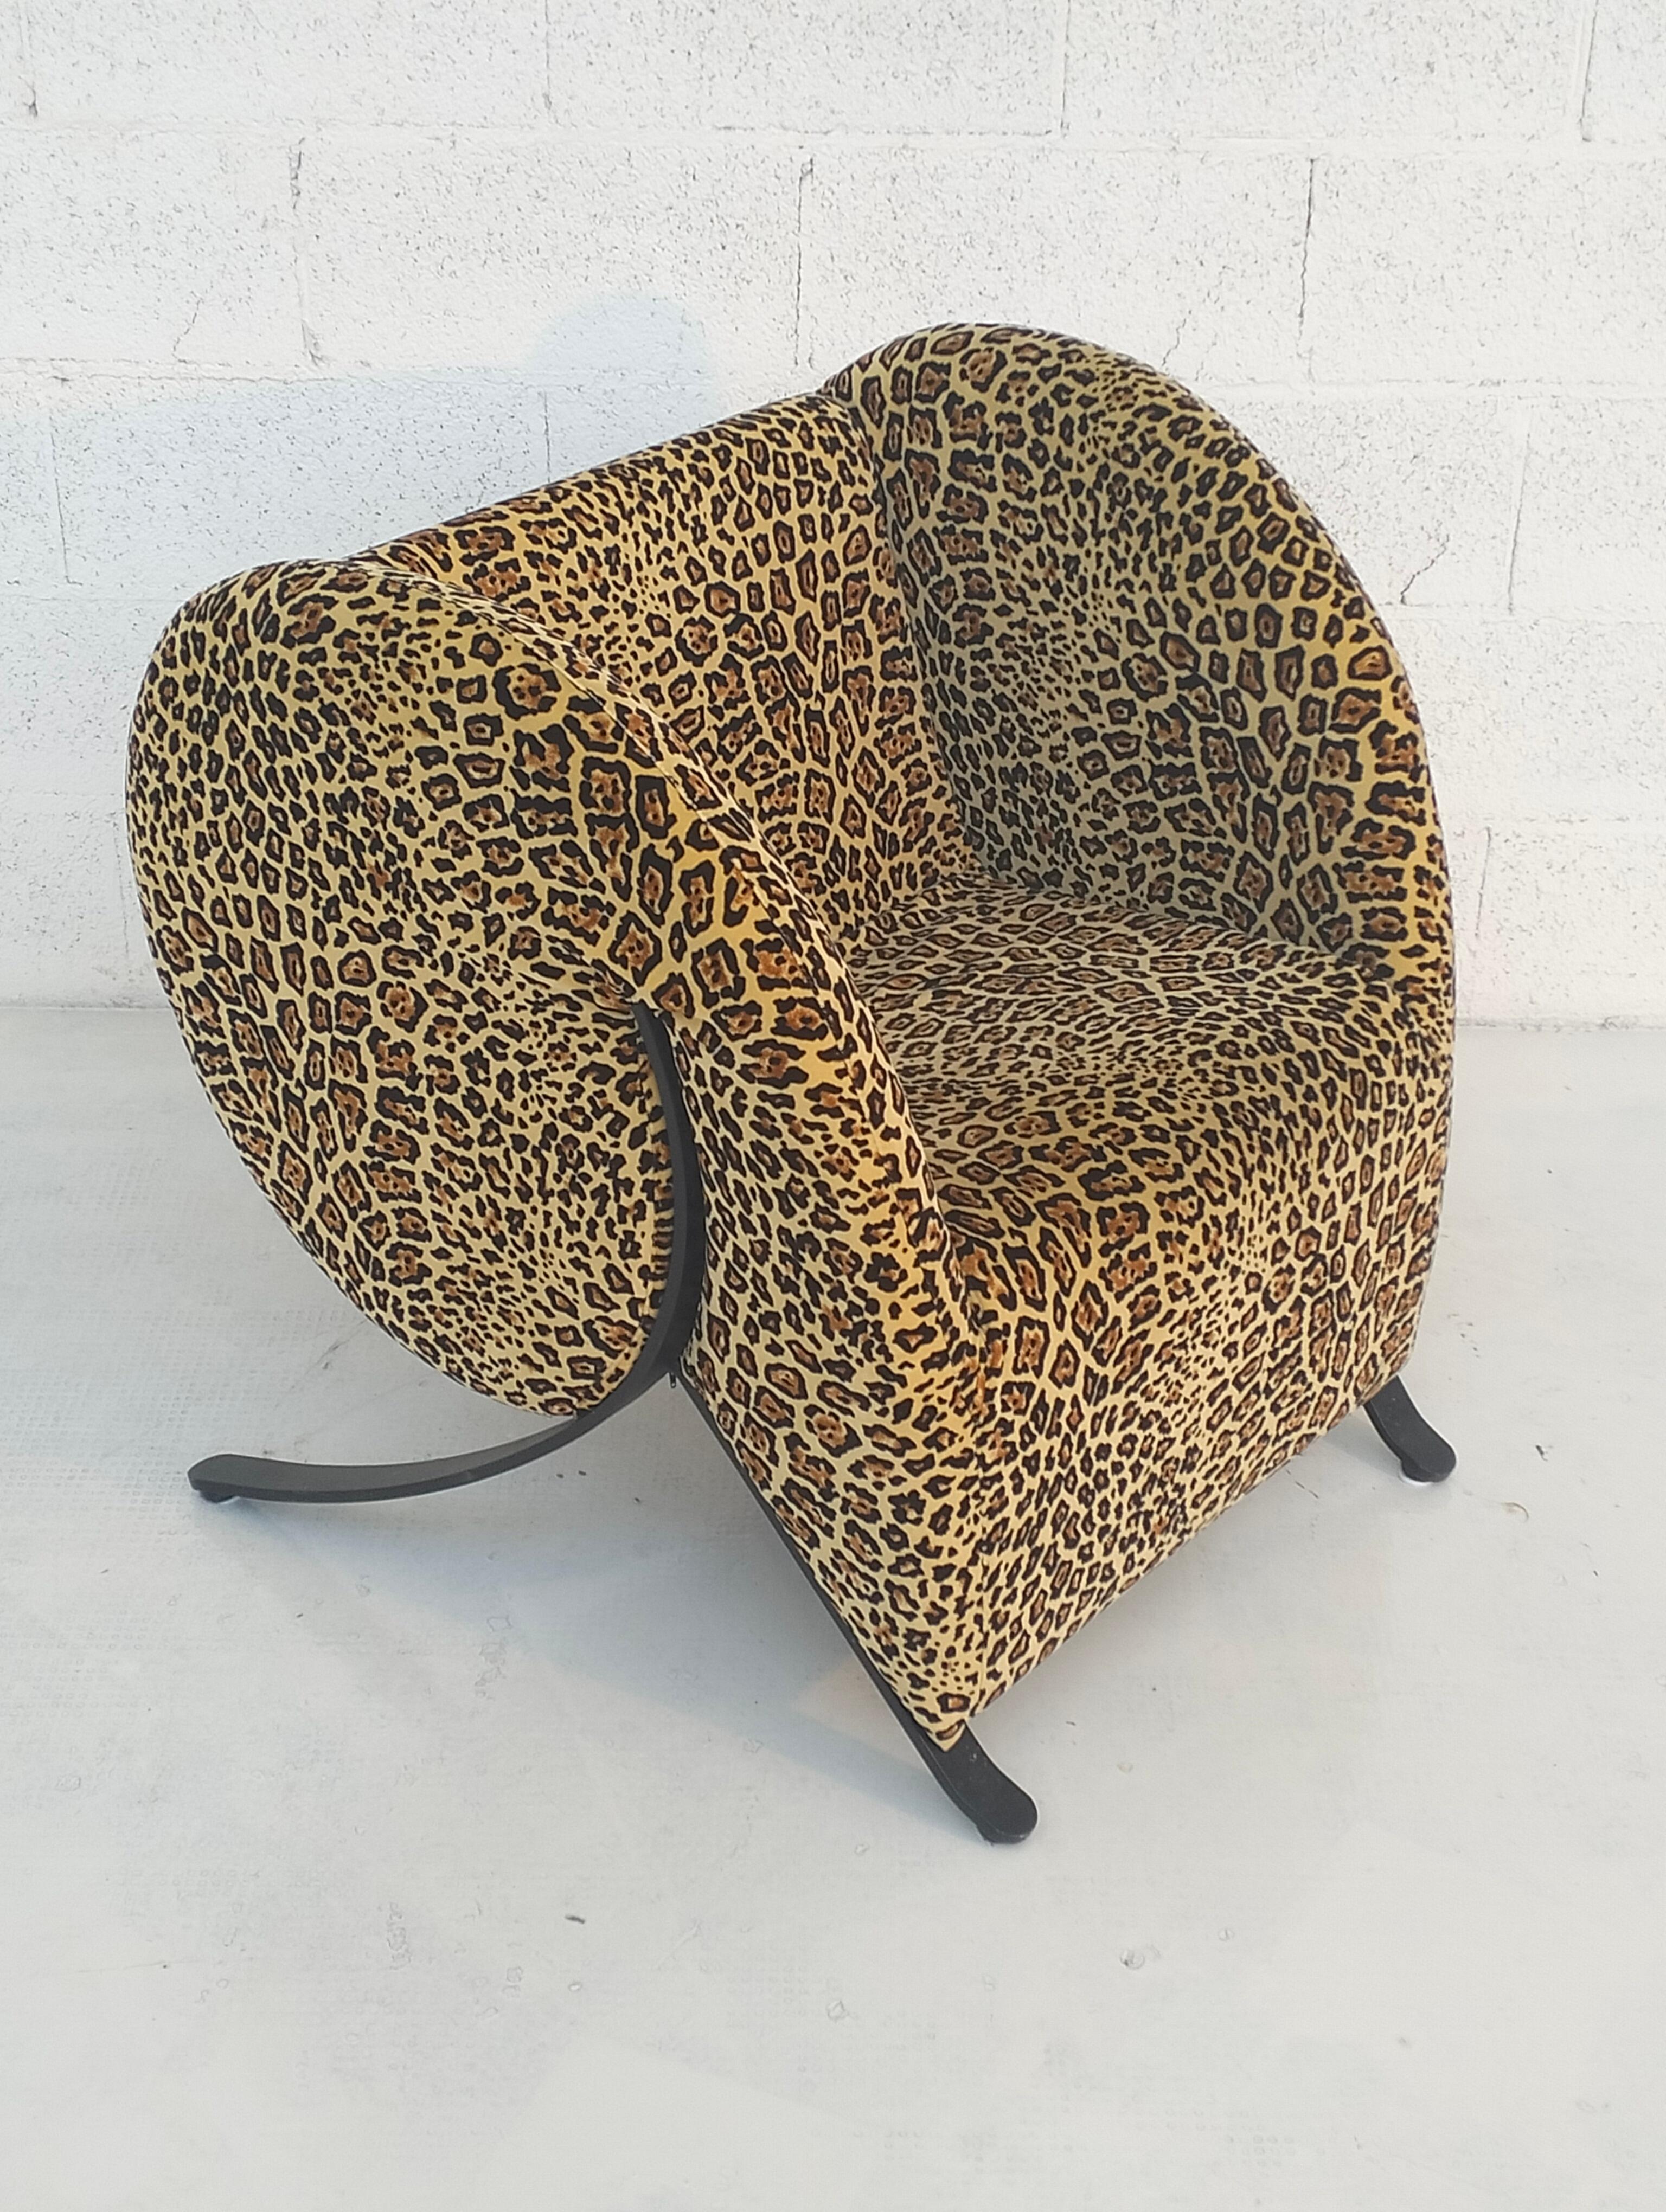 The Virgola armchair, designed by Yaakov Kaufman for Arflex, has a steel structure with padding in molded polyurethane and polyester fibre, sprung on elastic straps, black painted steel legs and fabric upholstery.

Yaacov Kaufman born 1945 is a